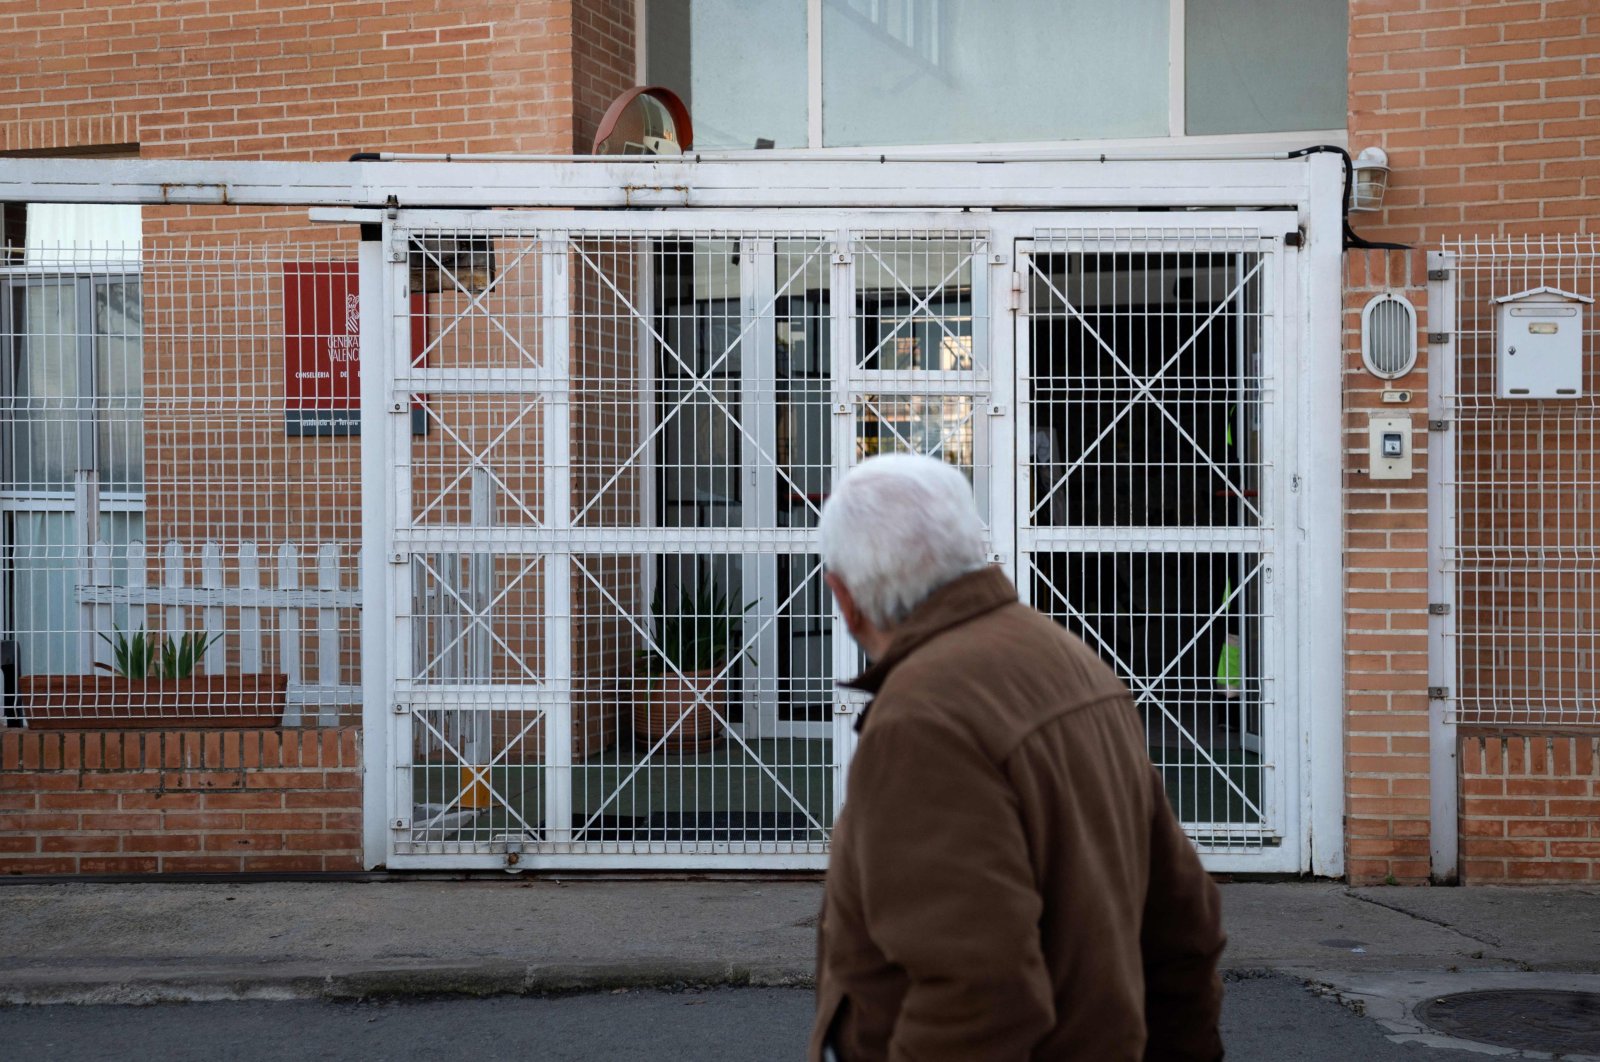 A man walks past the retirement home where a fire broke out overnight in Moncada near Valencia, Spain, on Jan. 19, 2022. (Photo by Jose Jordan / AFP)